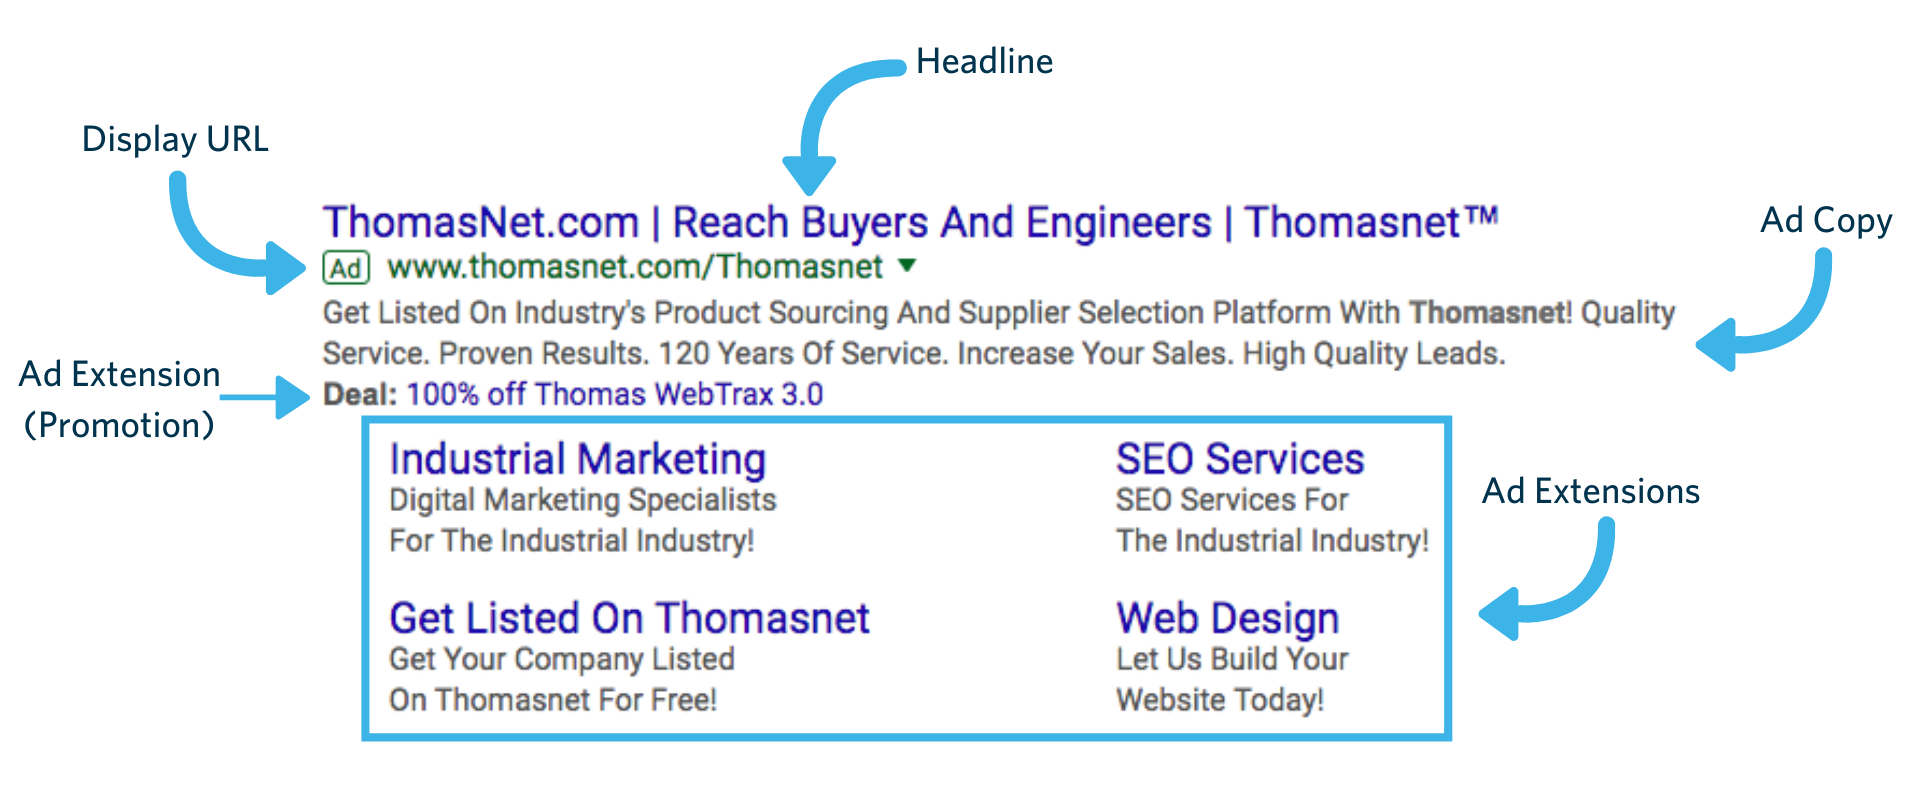 Google Ad extensions - how to drive traffic to your manufacturing website